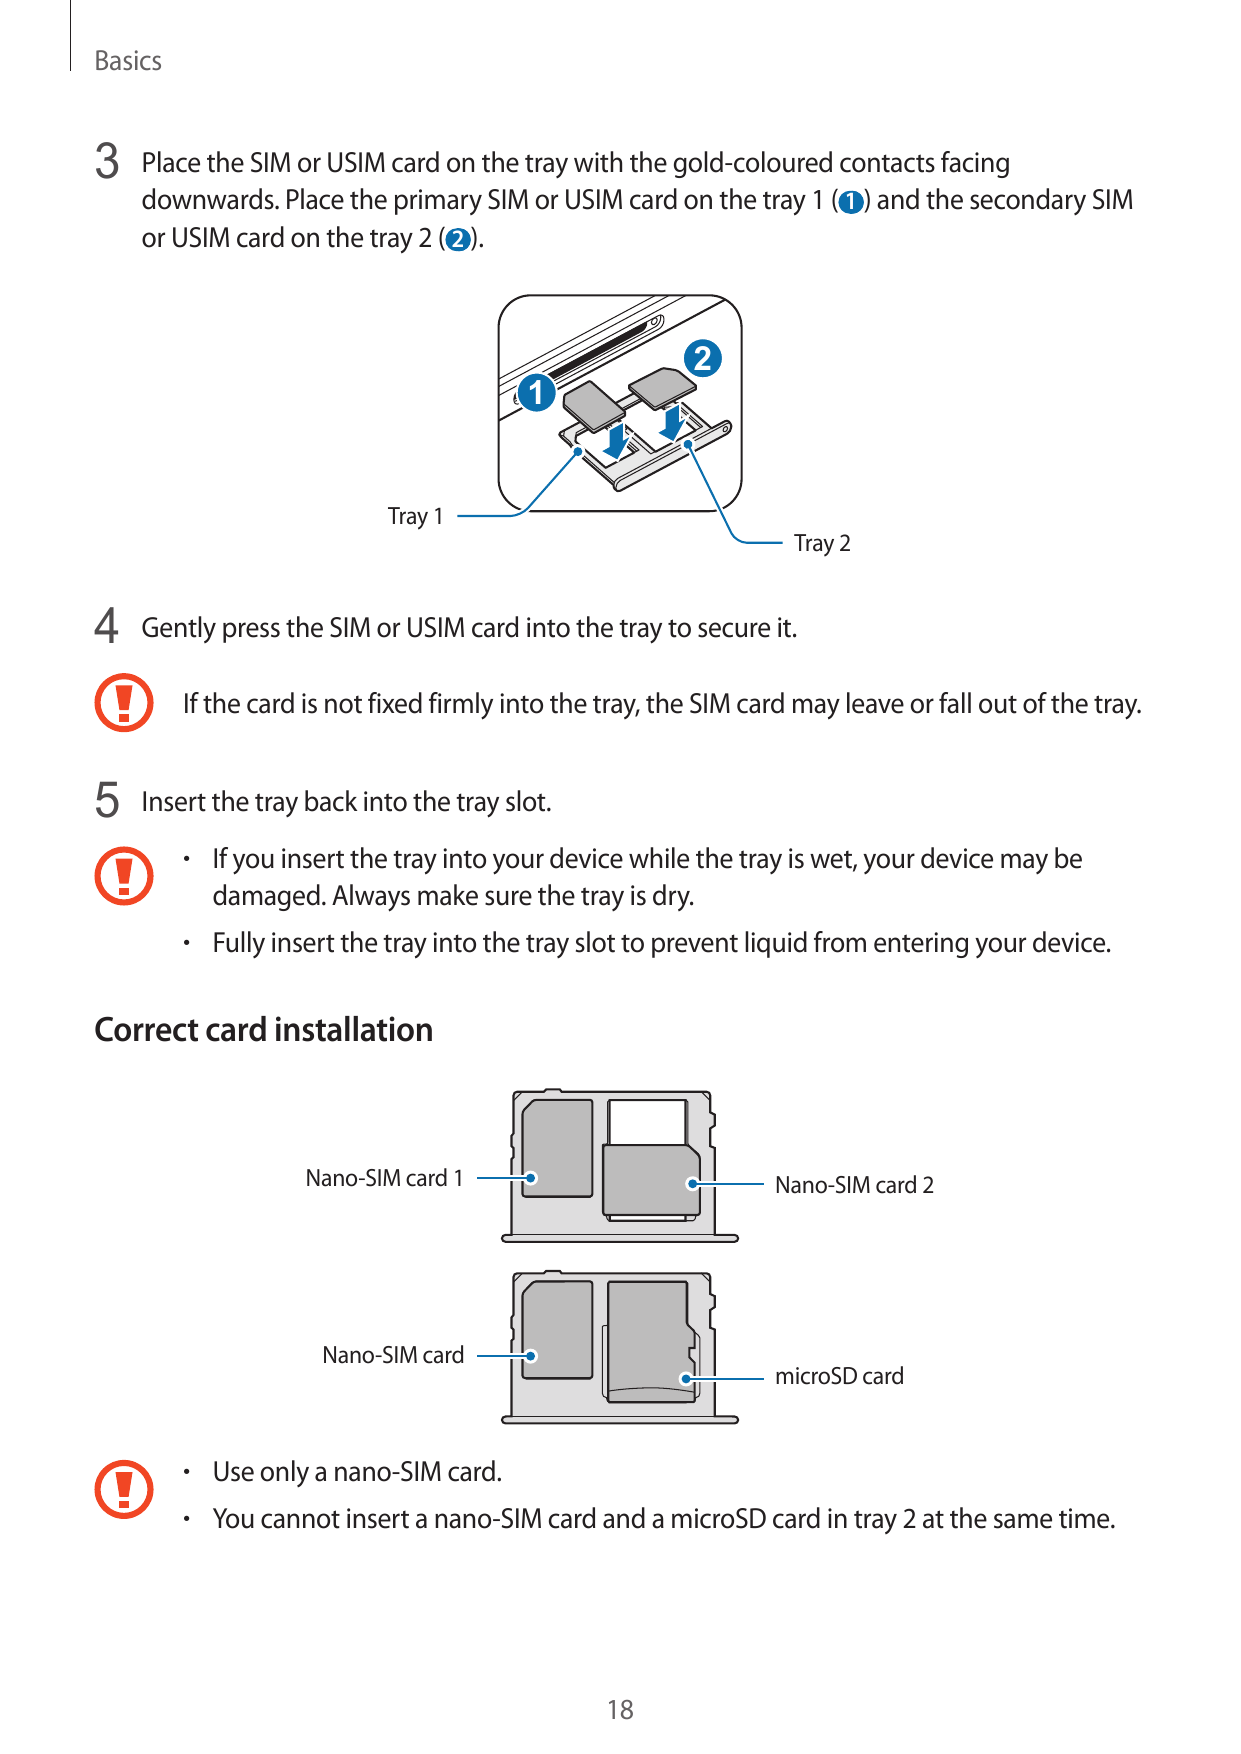 Basics3 Place the SIM or USIM card on the tray with the gold-coloured contacts facingdownwards. Place the primary SIM or USIM ca